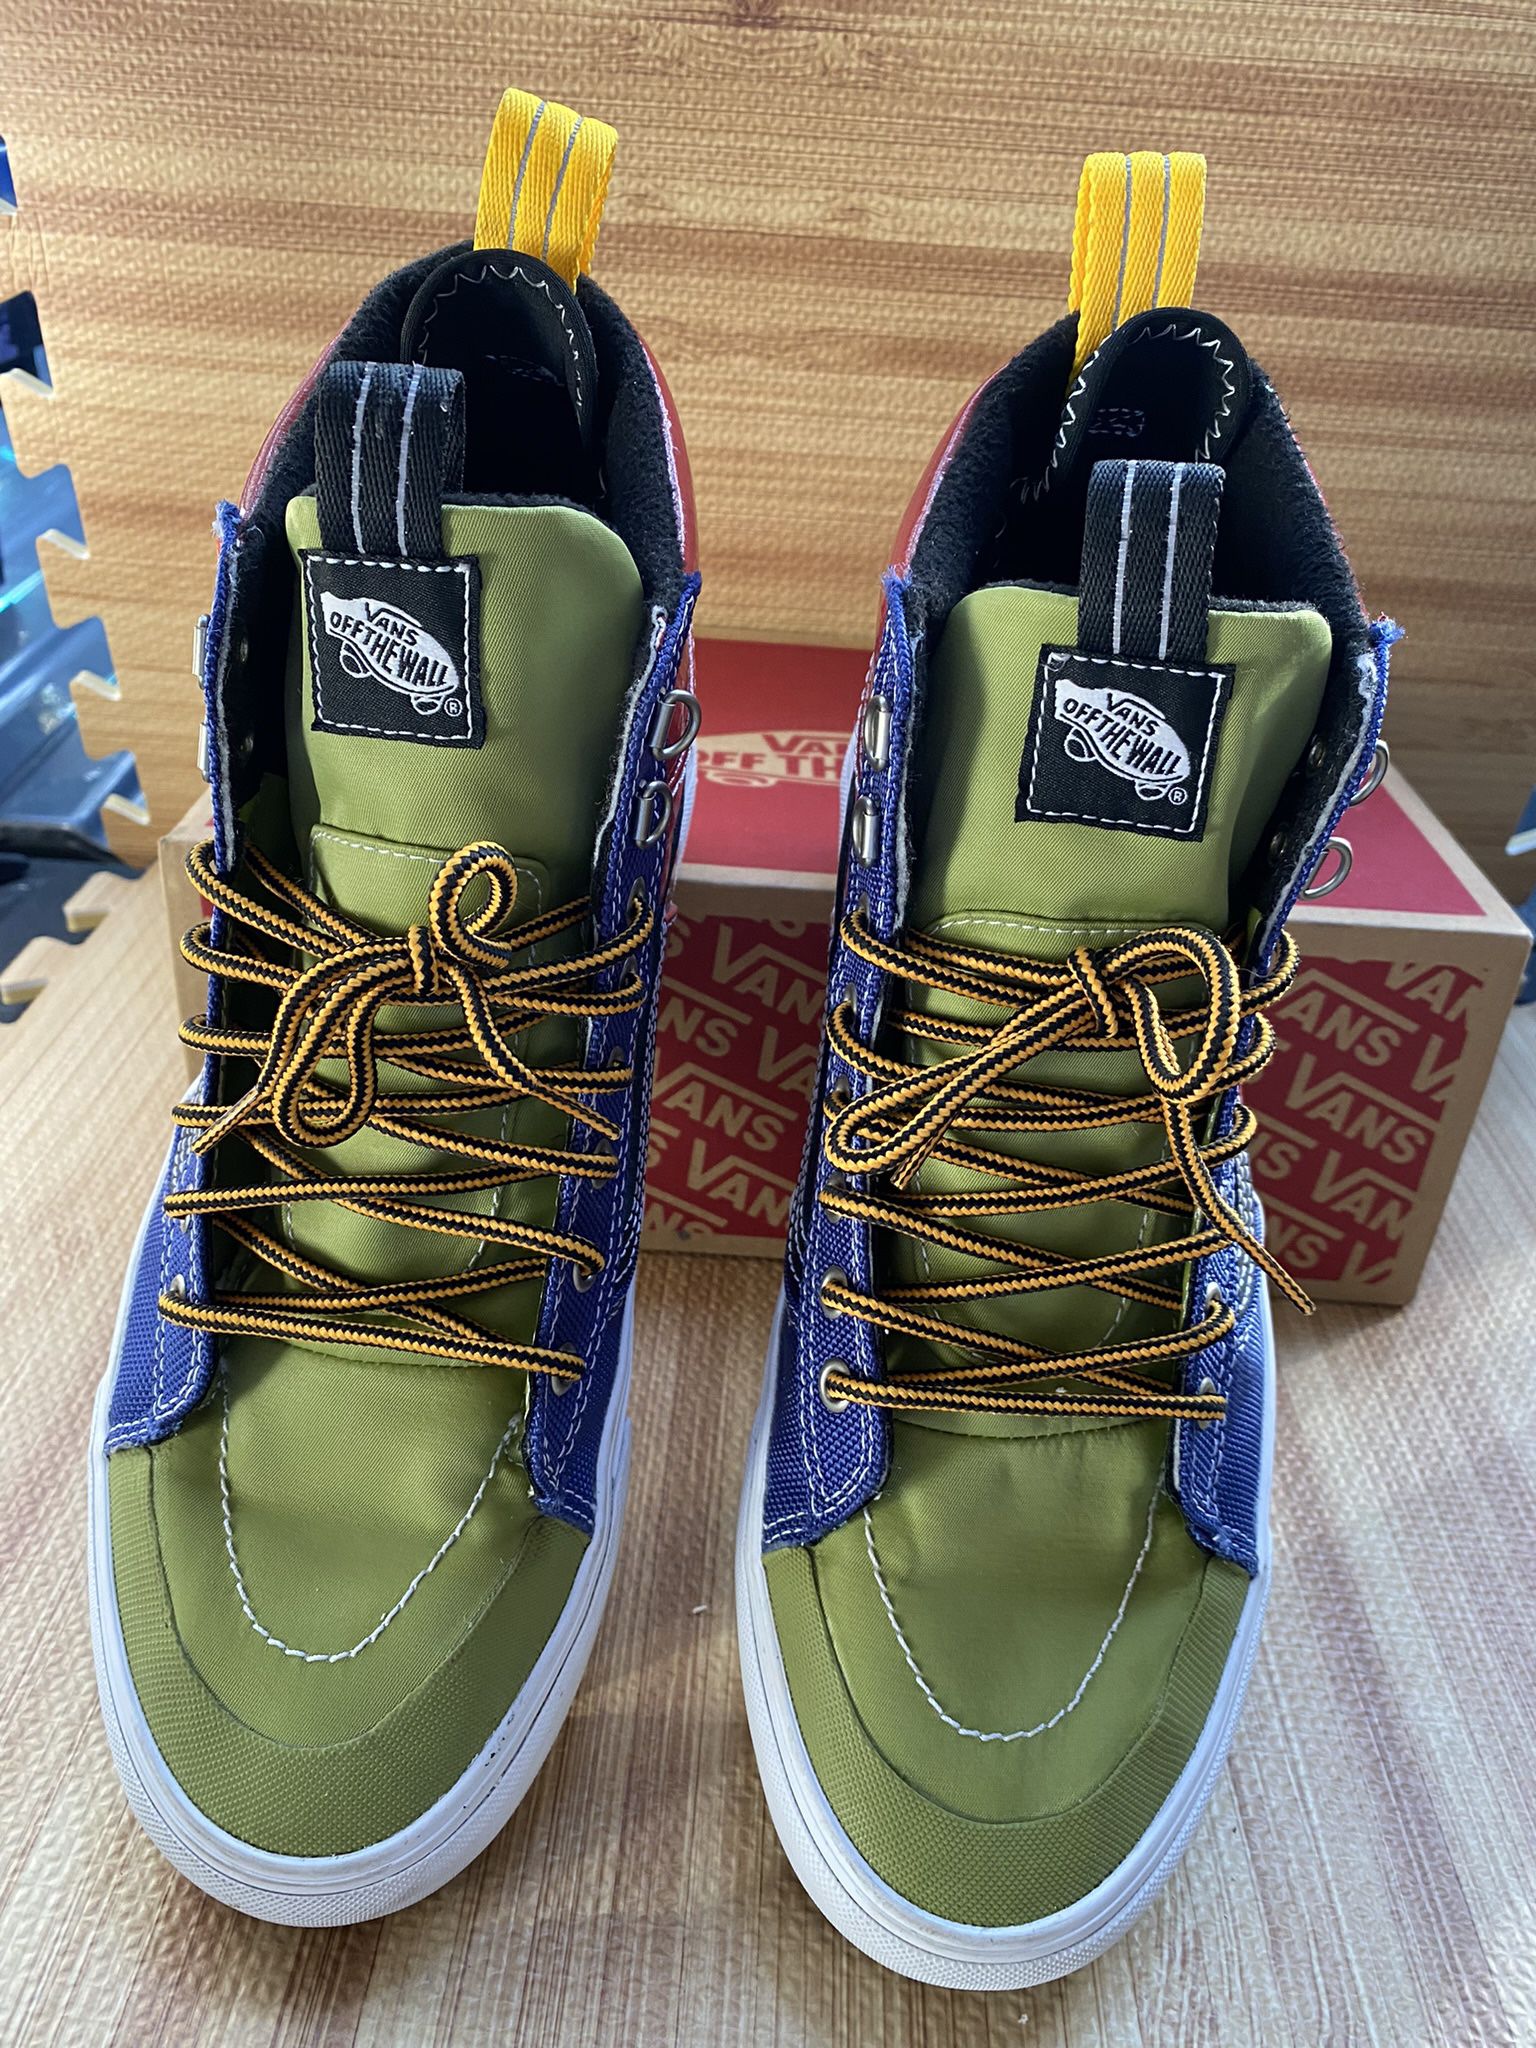 Vans Mte 2.0 Dx multiple colors ultra Cush All weather for Sale in Jacksonville, FL OfferUp